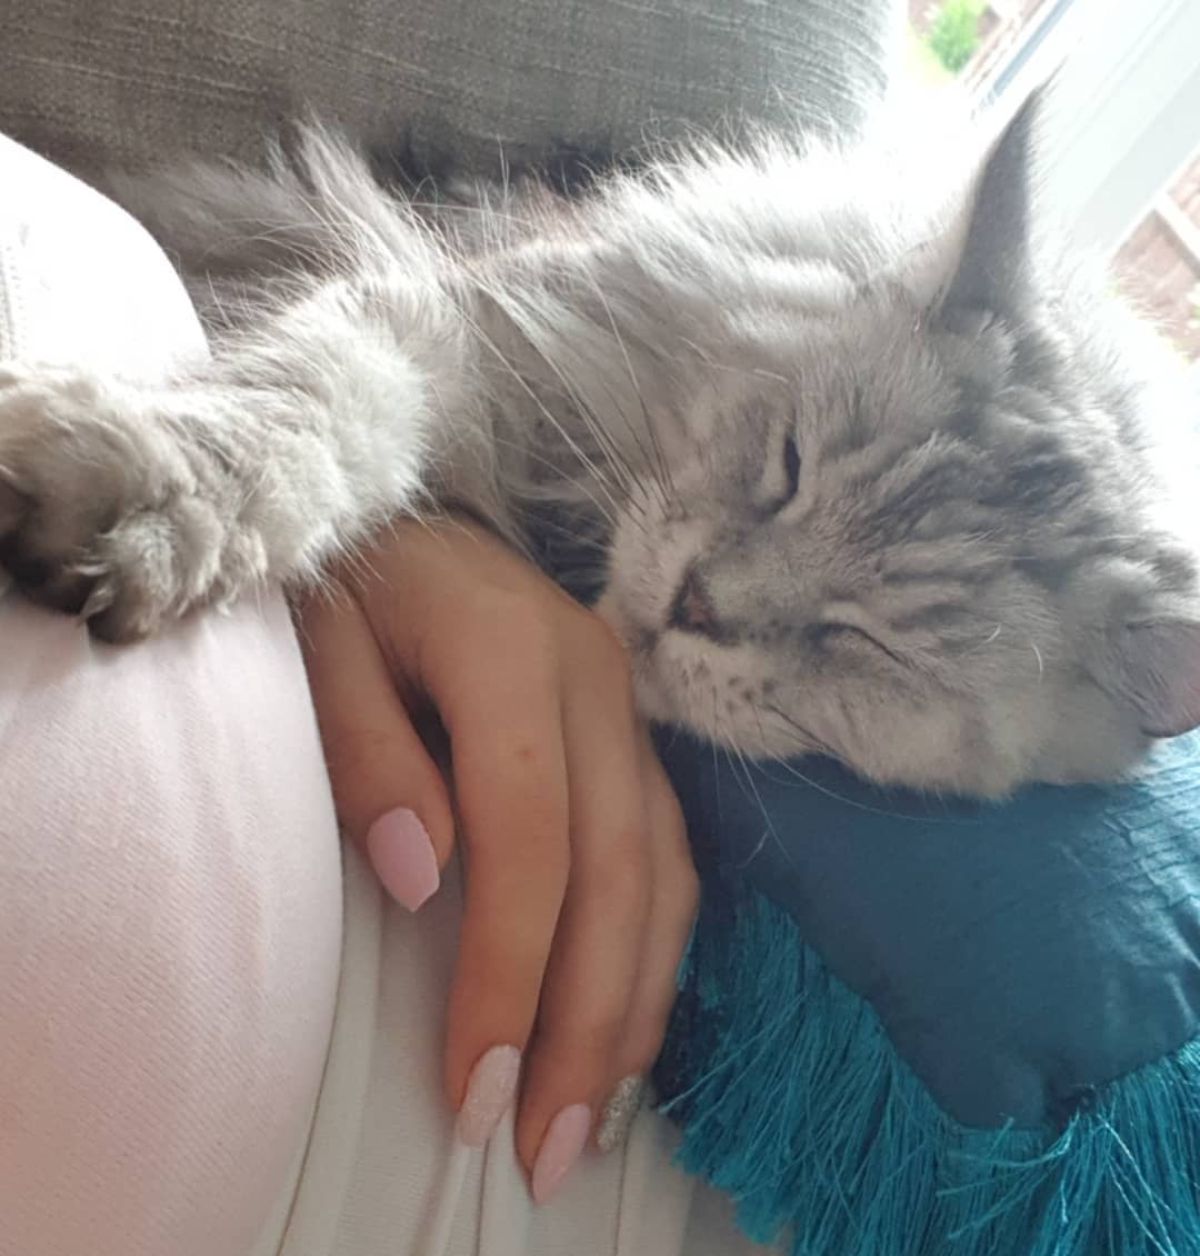 An adorable gray maine coon lying on its owner.